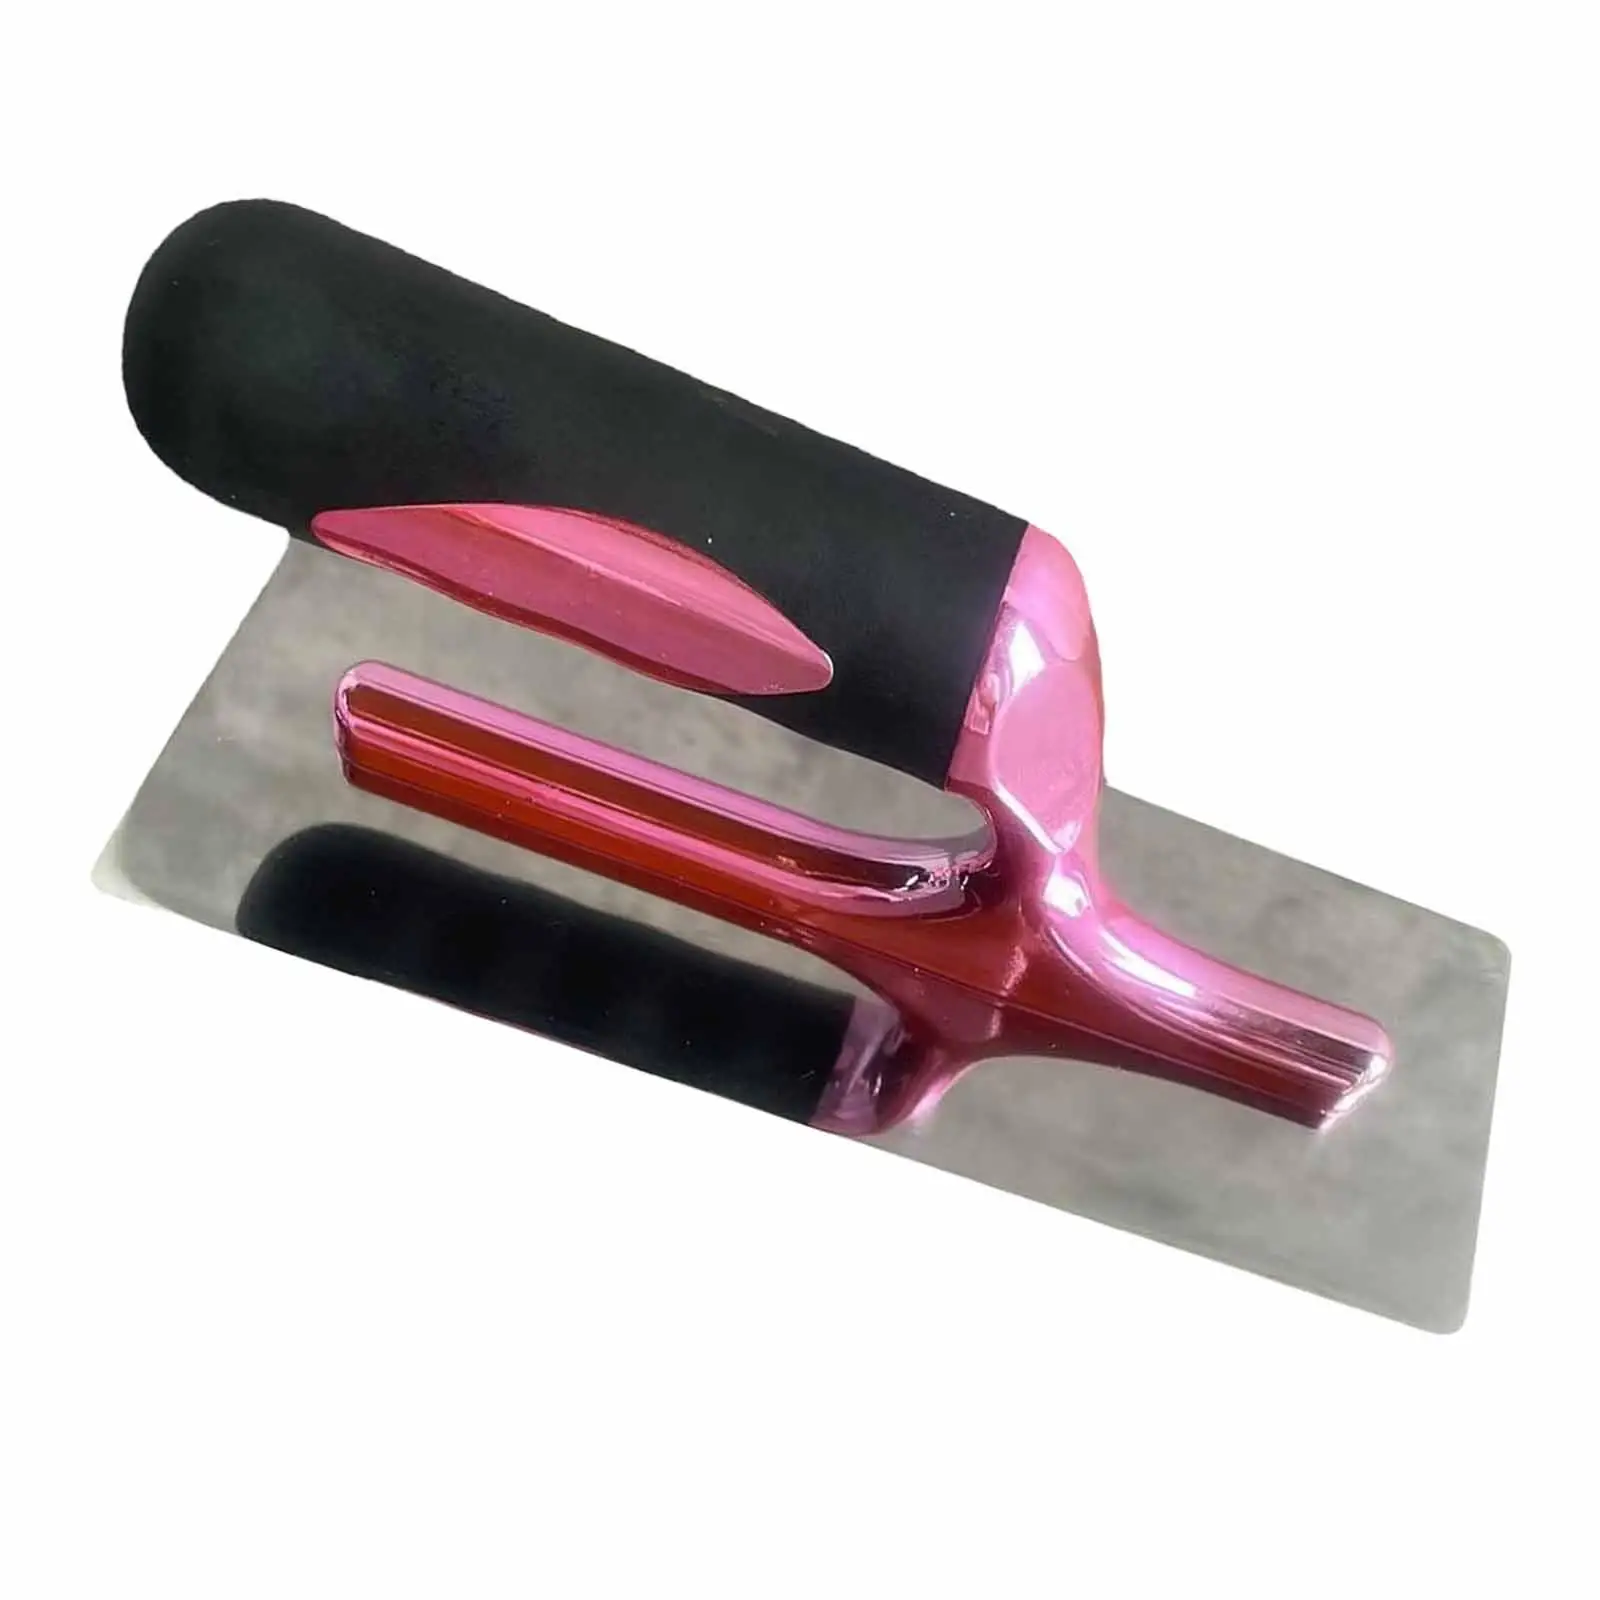 Finishing Trowel Drywall Trowel for Applying Putty Home Decorating Concrete